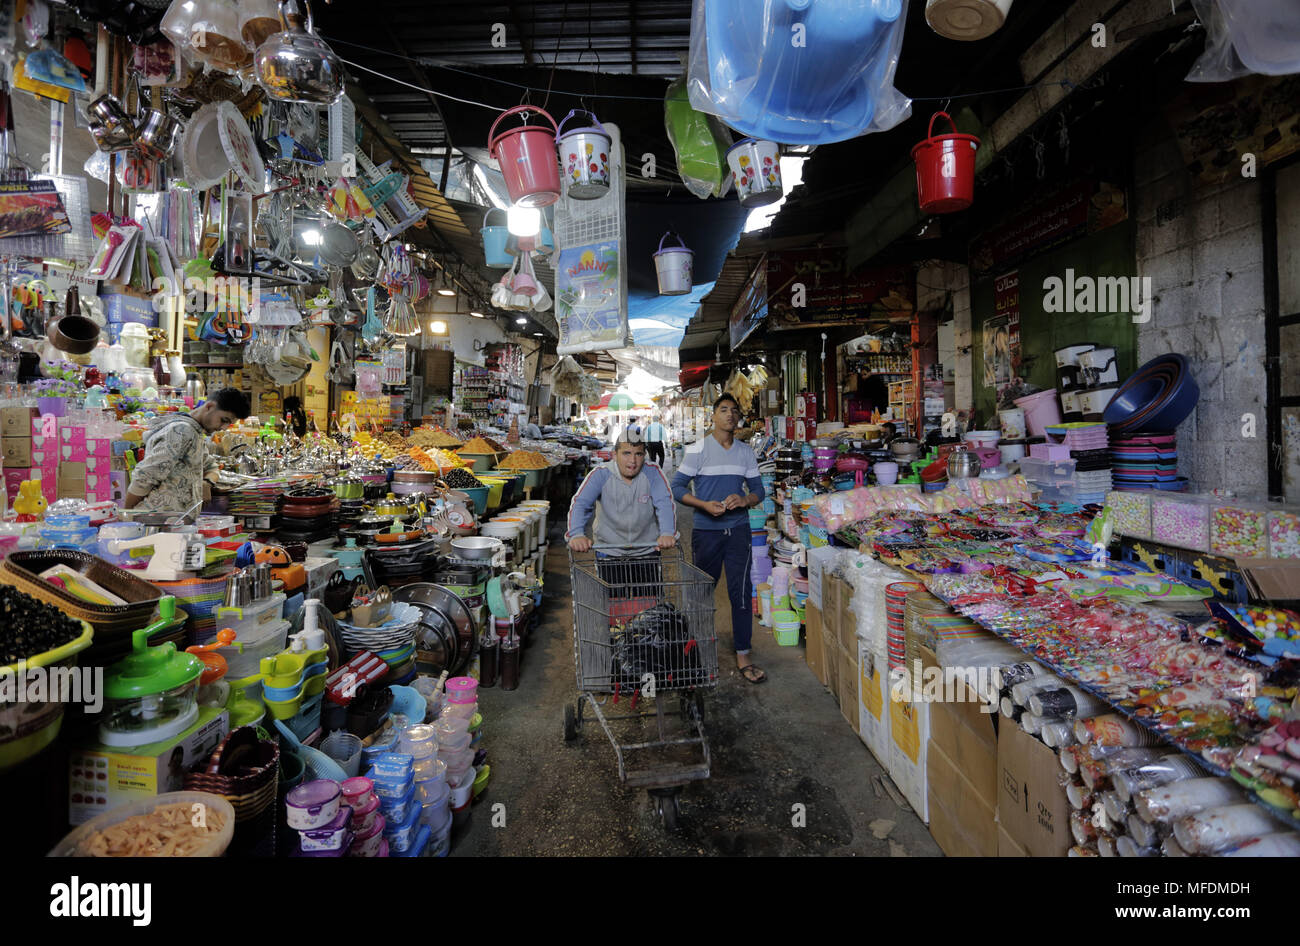 Gaza City, The Gaza Strip, Palestine. 24th Apr, 2018. Palestinians shop at a market in Gaza city. Gazans are strapped for cash and markets are suffering from an unprecedented recession. Credit: Mahmoud Issa/Quds Net News/ZUMA Wire/Alamy Live News Stock Photo